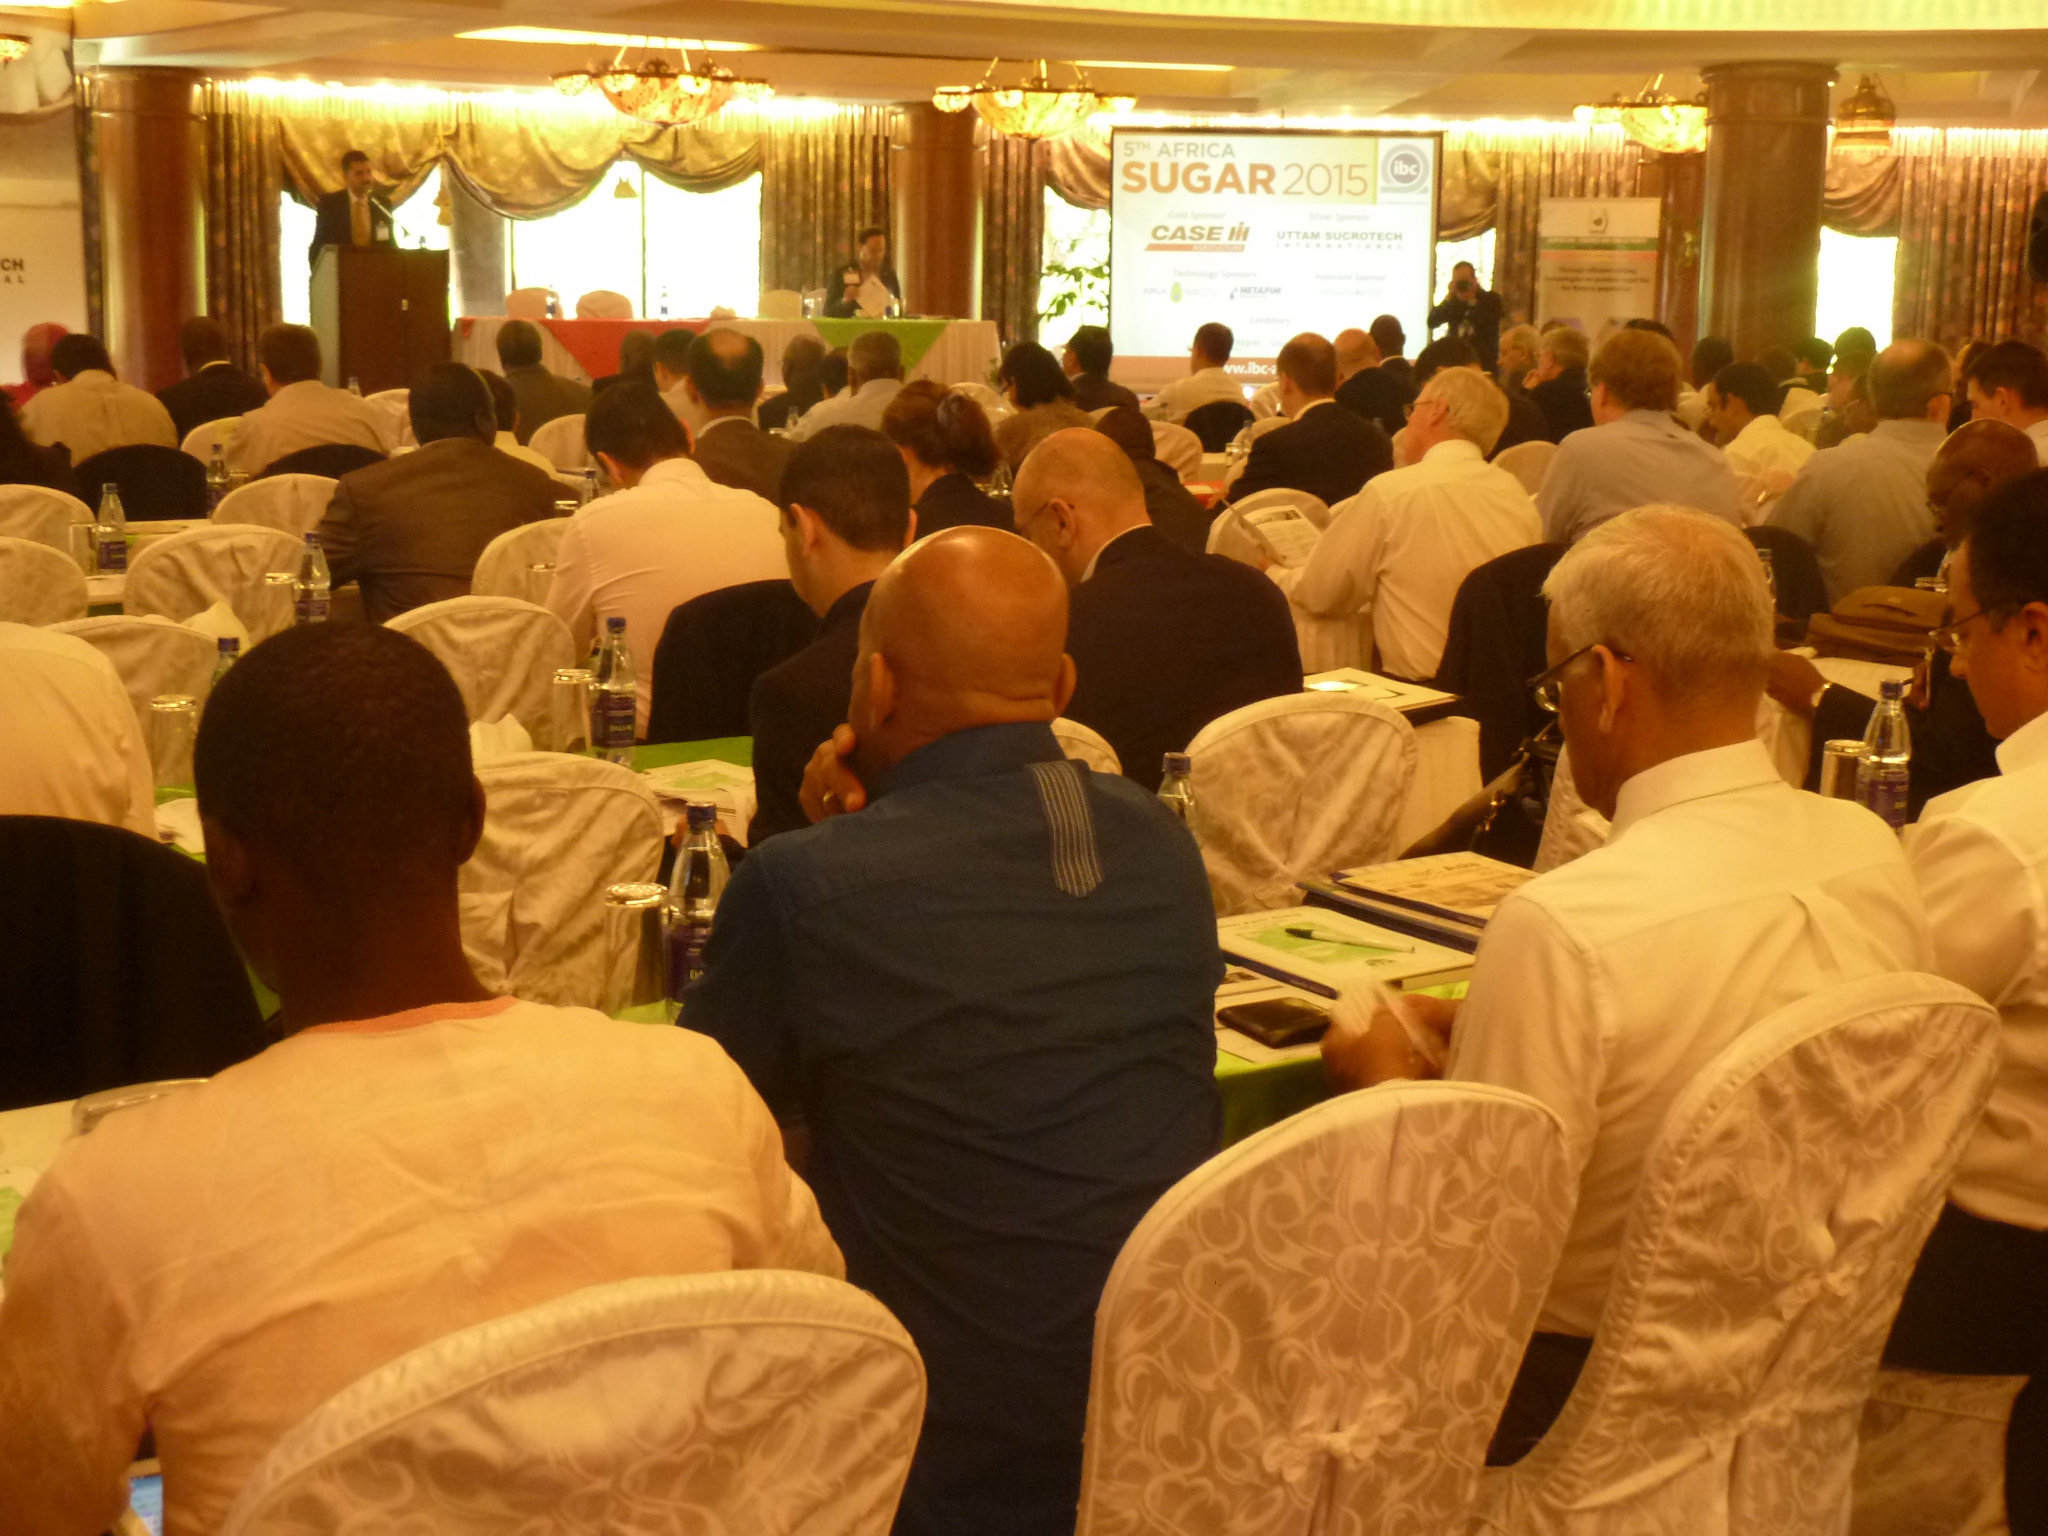 CASE IH FOREFRONT SOLUTIONS FOR THE SUGAR CANE INDUSTRY AT THE 5TH AFRICA SUGAR OUTLOOK CONFERENCE IN KENYA